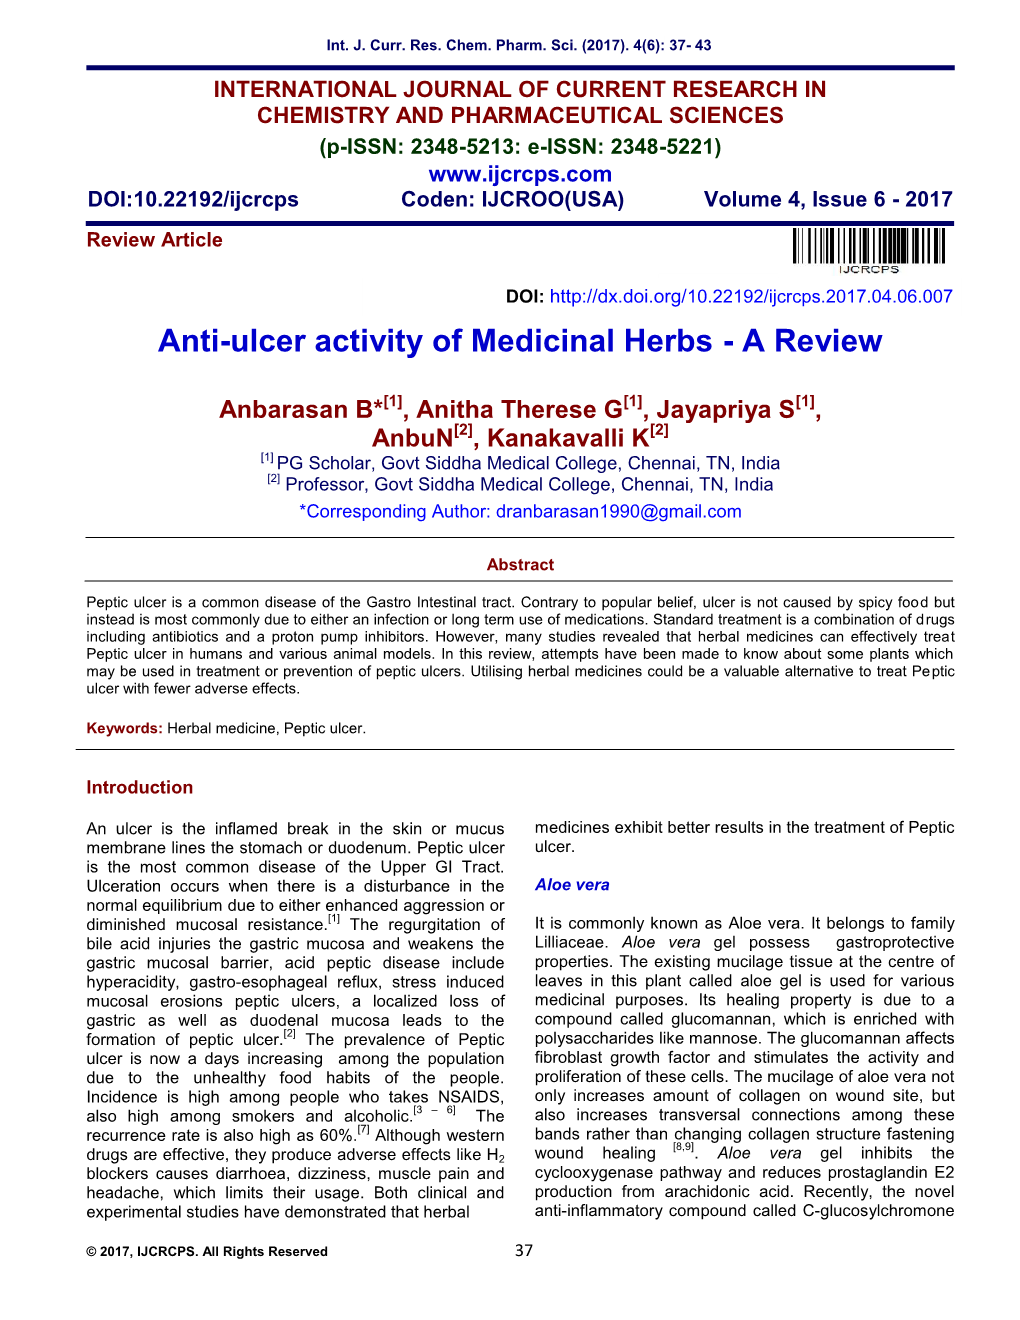 Anti-Ulcer Activity of Medicinal Herbs - a Review